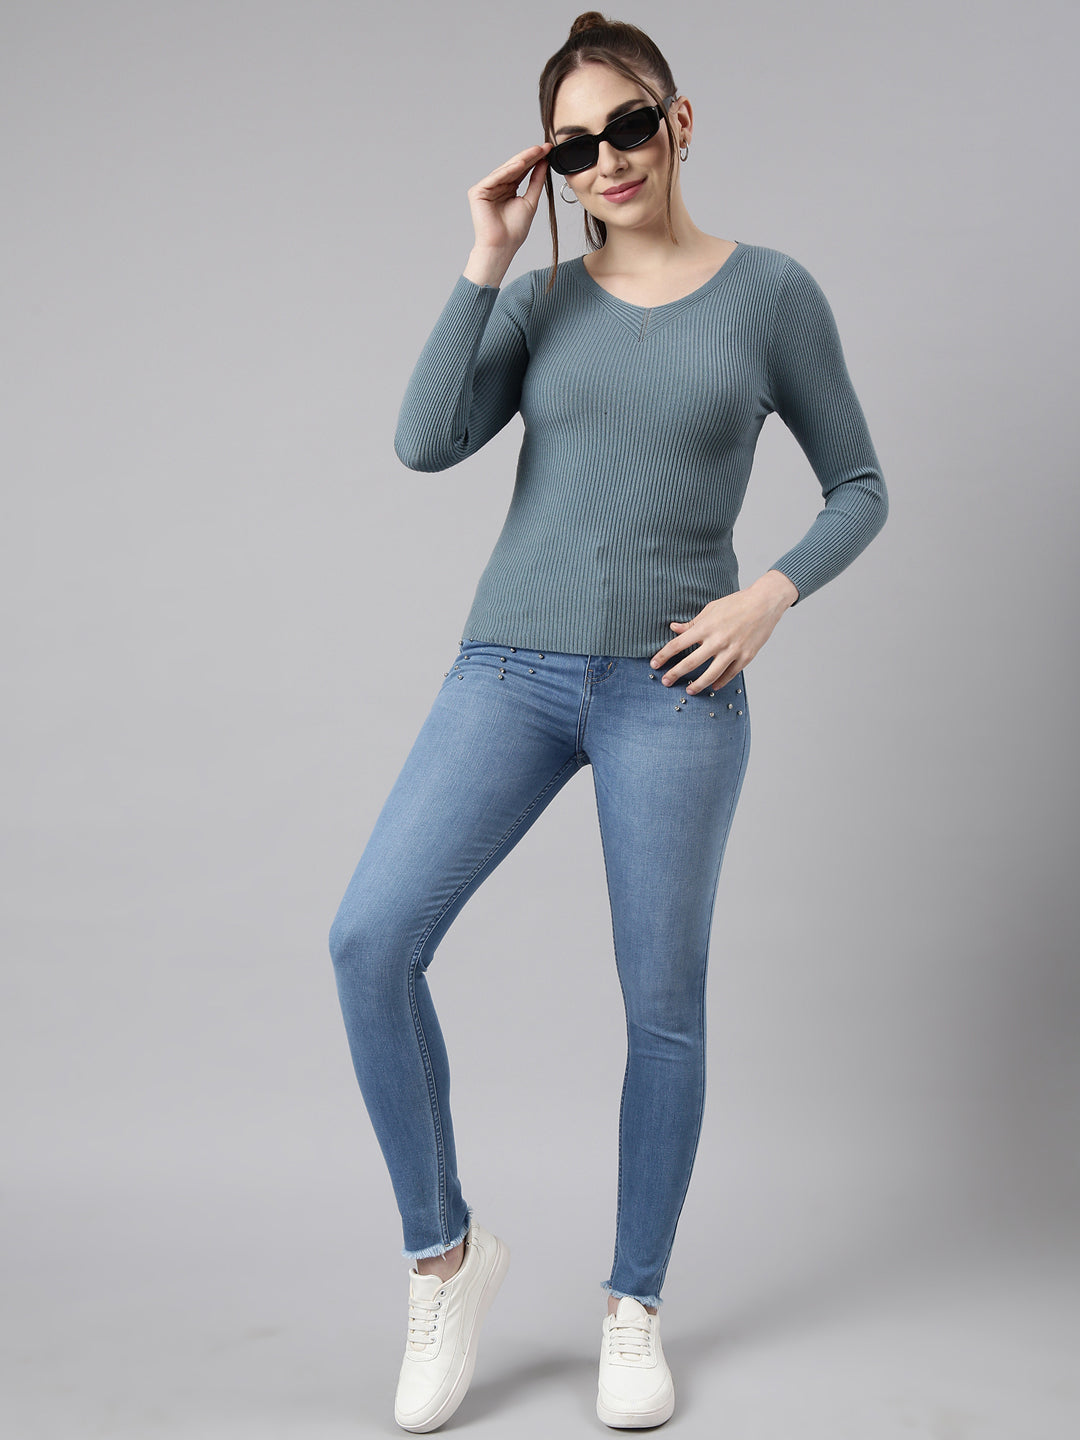 Women Grey Solid Fitted Top